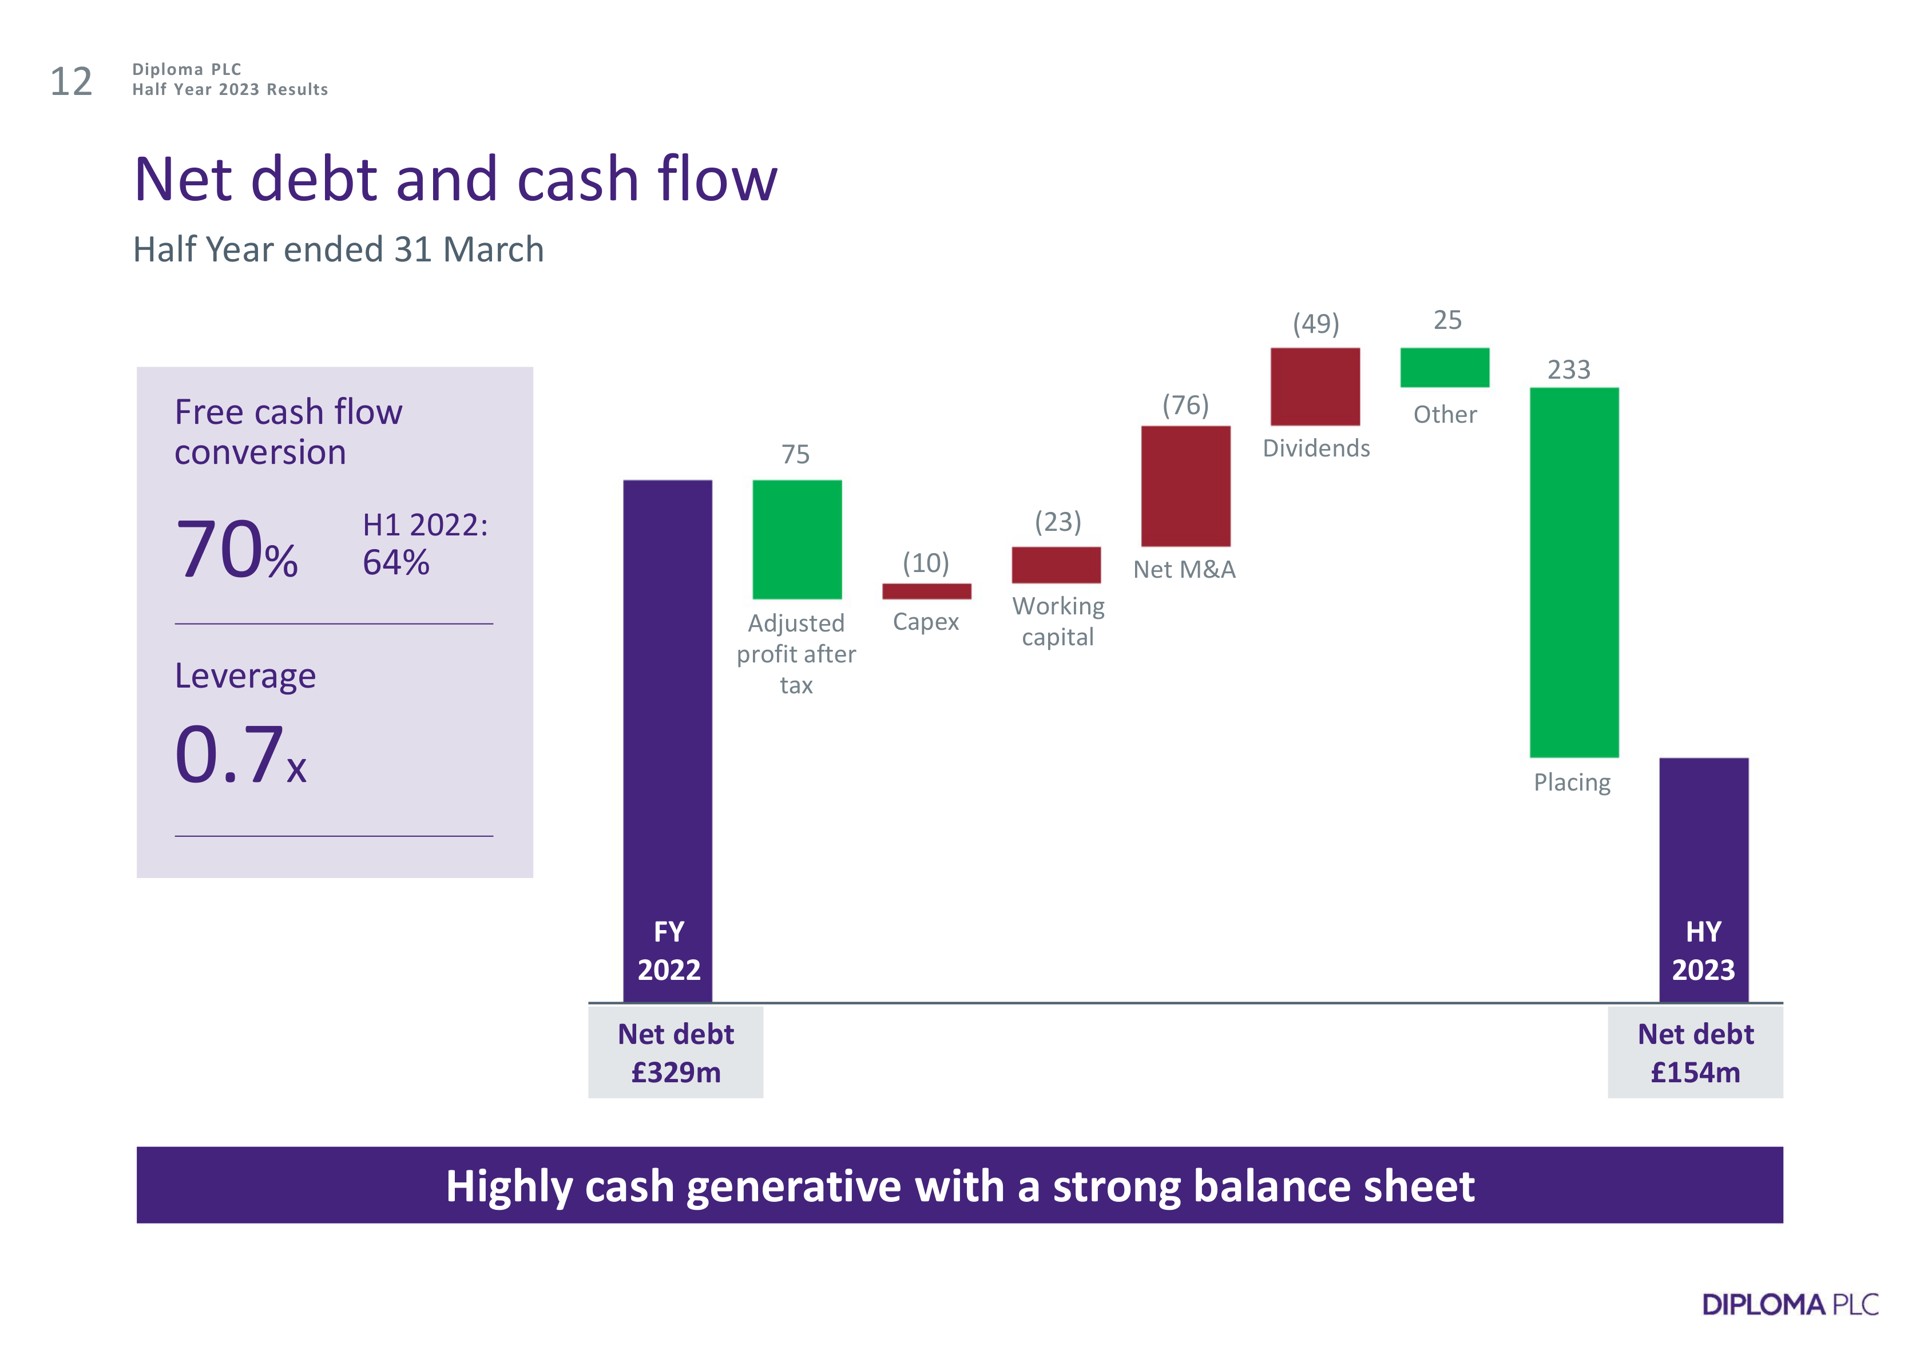 net debt and cash flow half year ended march free cash flow conversion leverage highly cash generative with a strong balance sheet me | Diploma